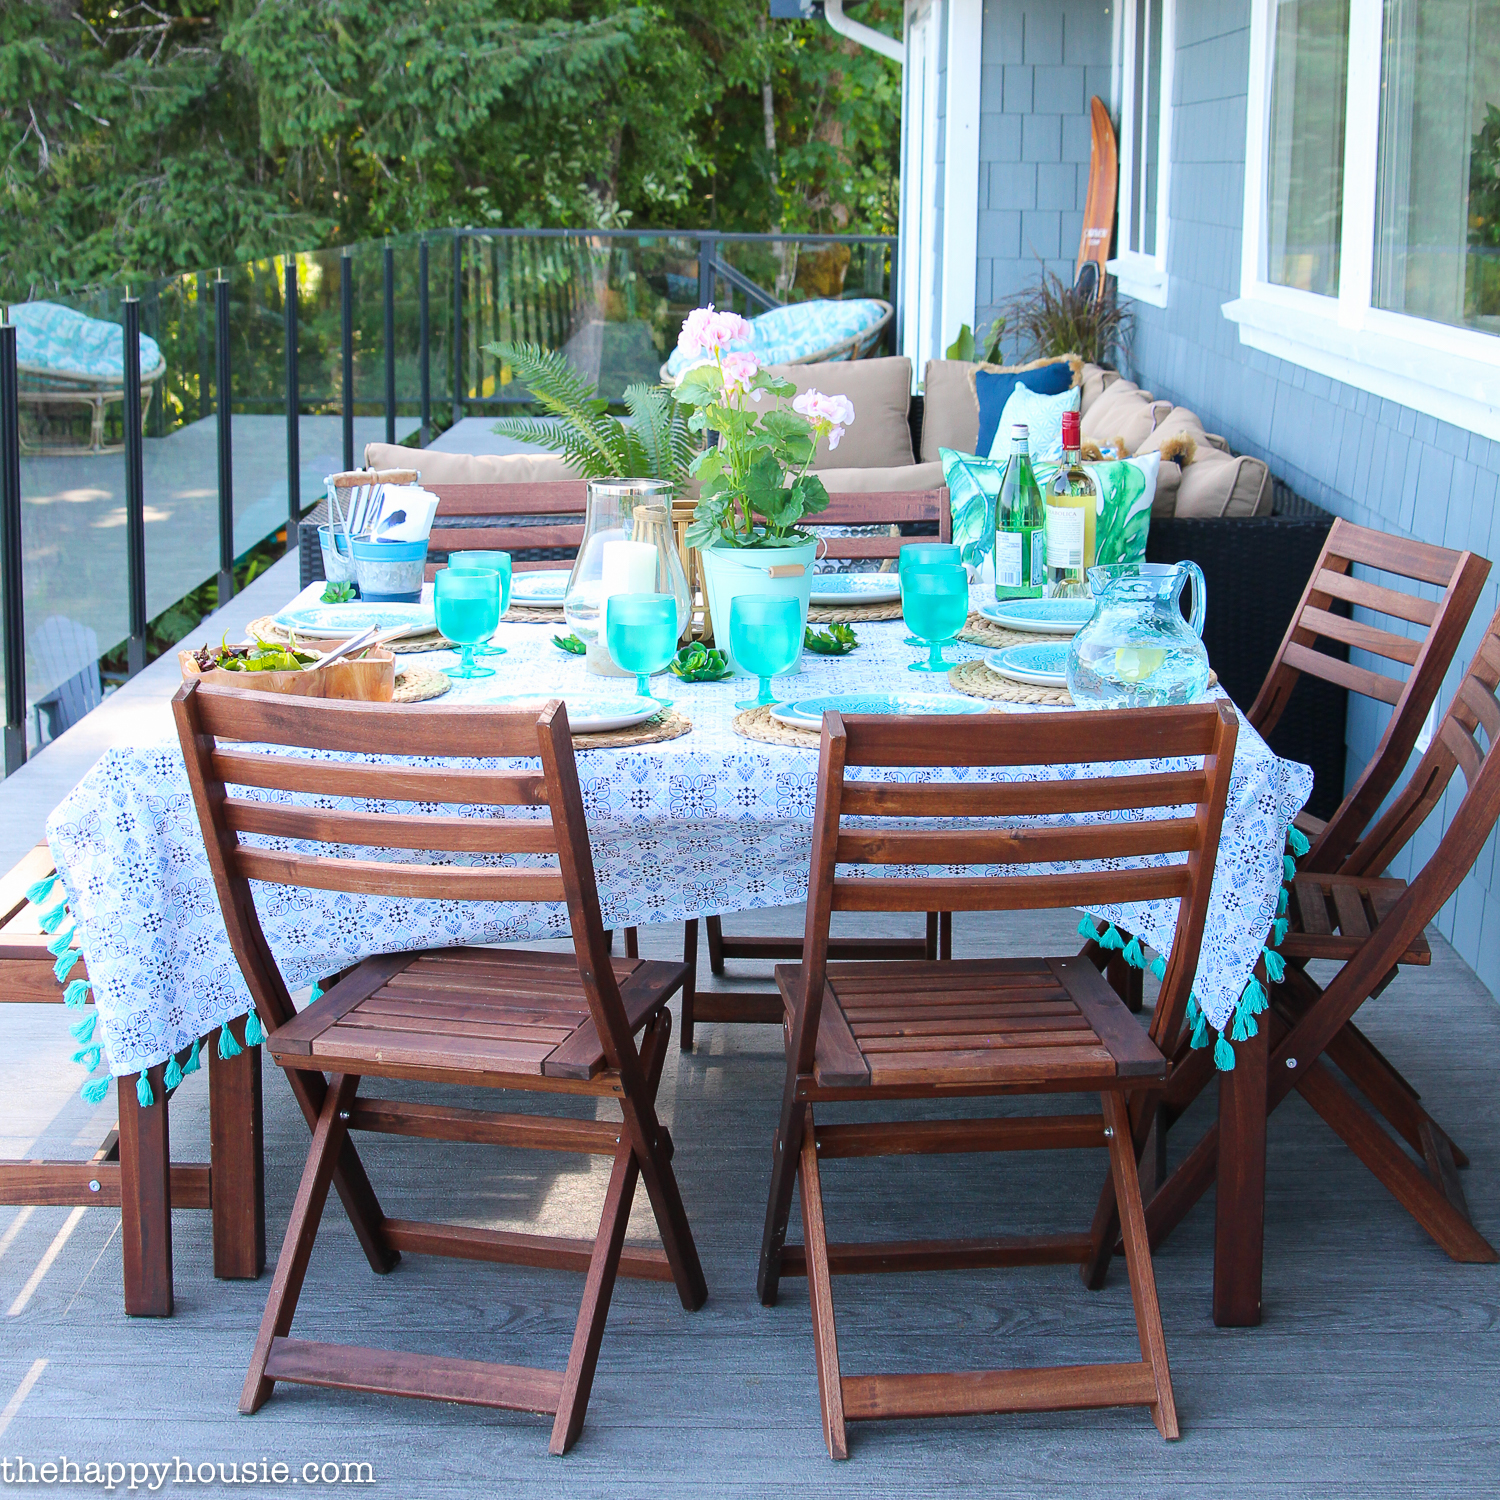 Summer Decorating Ideas for Outdoor Entertaining